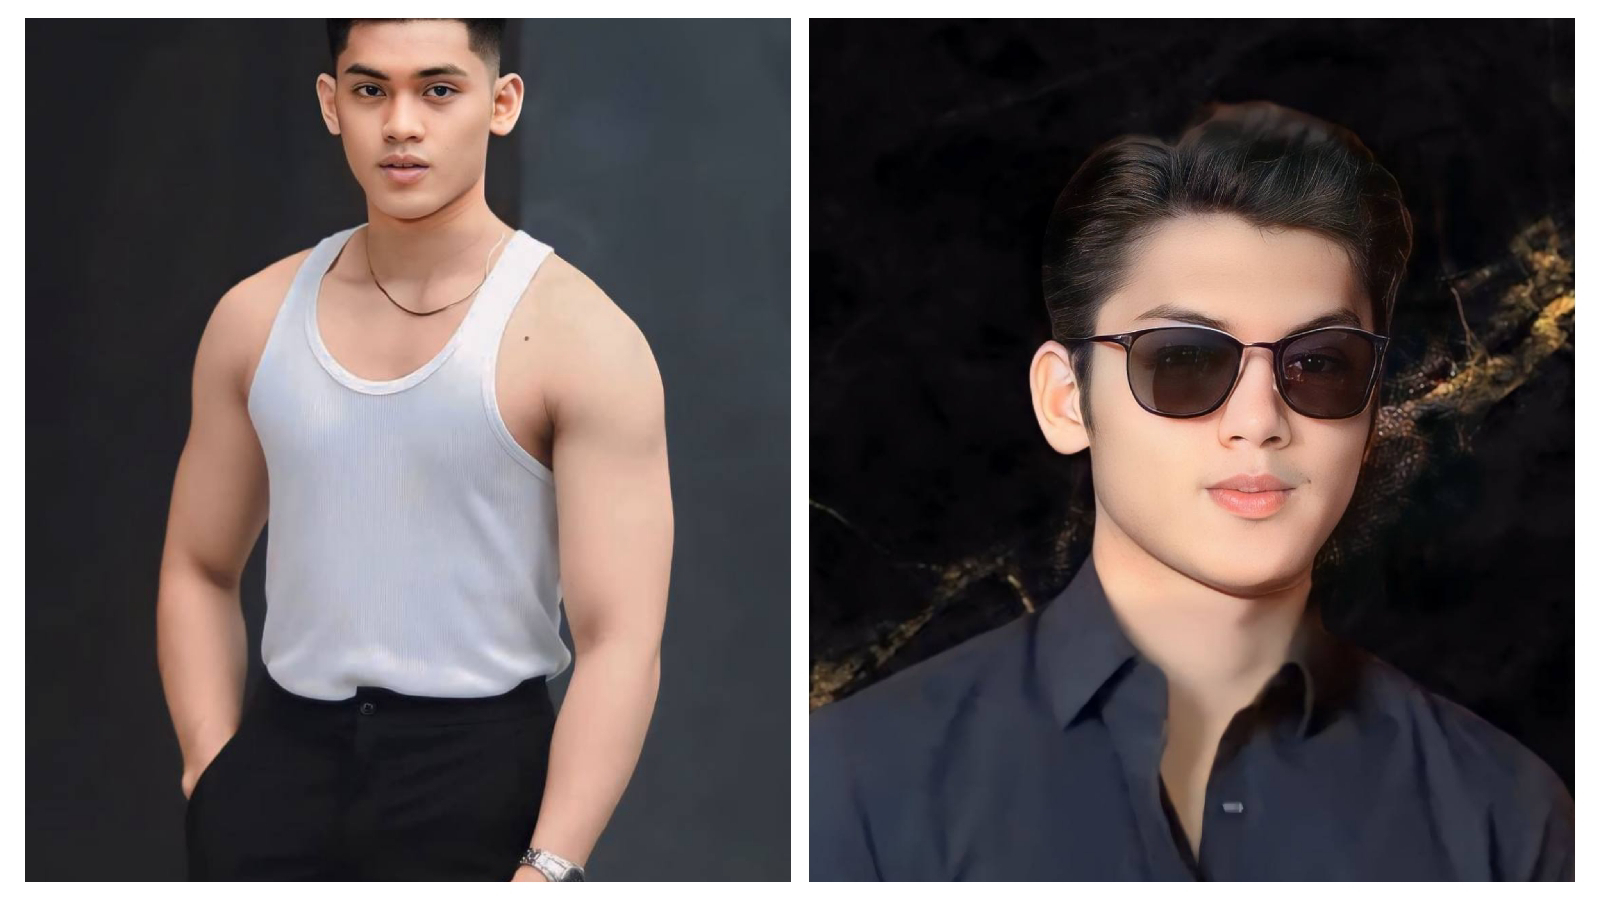 FULL VIDEO Pasend link trends as Filipino actor Armani Hector